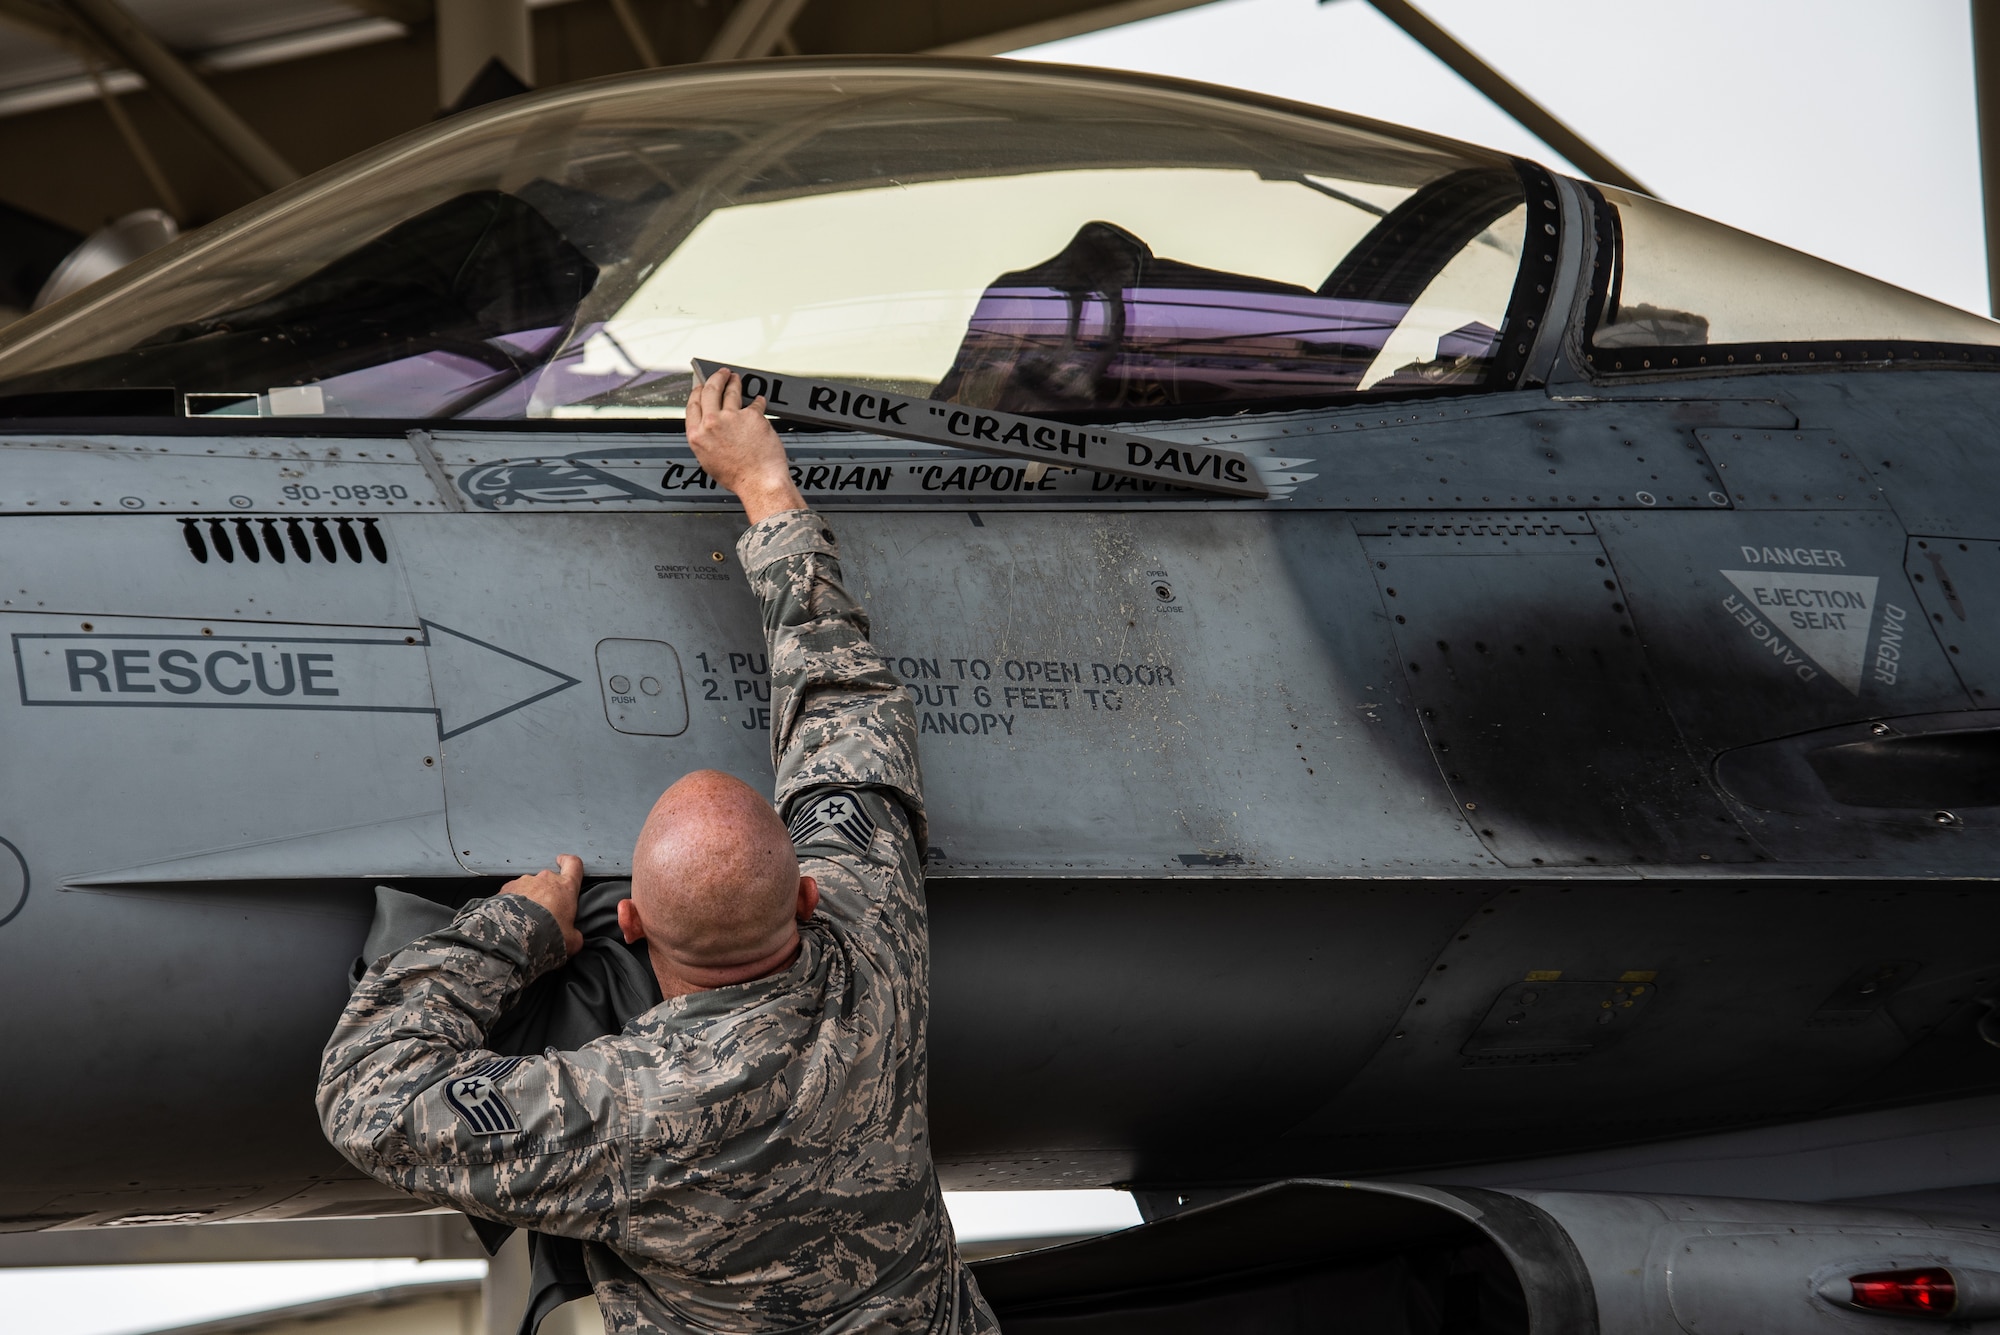 U.S. Air Force Staff Sgt. Tyler Roecker, 20th Aircraft Maintenance Squadron dedicated crew chief, unveils 55th Fighter Squadron (FS) pilot Capt. Brian Davis’ name on an F-16CM Fighting Falcon at Shaw Air Force Base, S.C., Aug. 3, 2018.